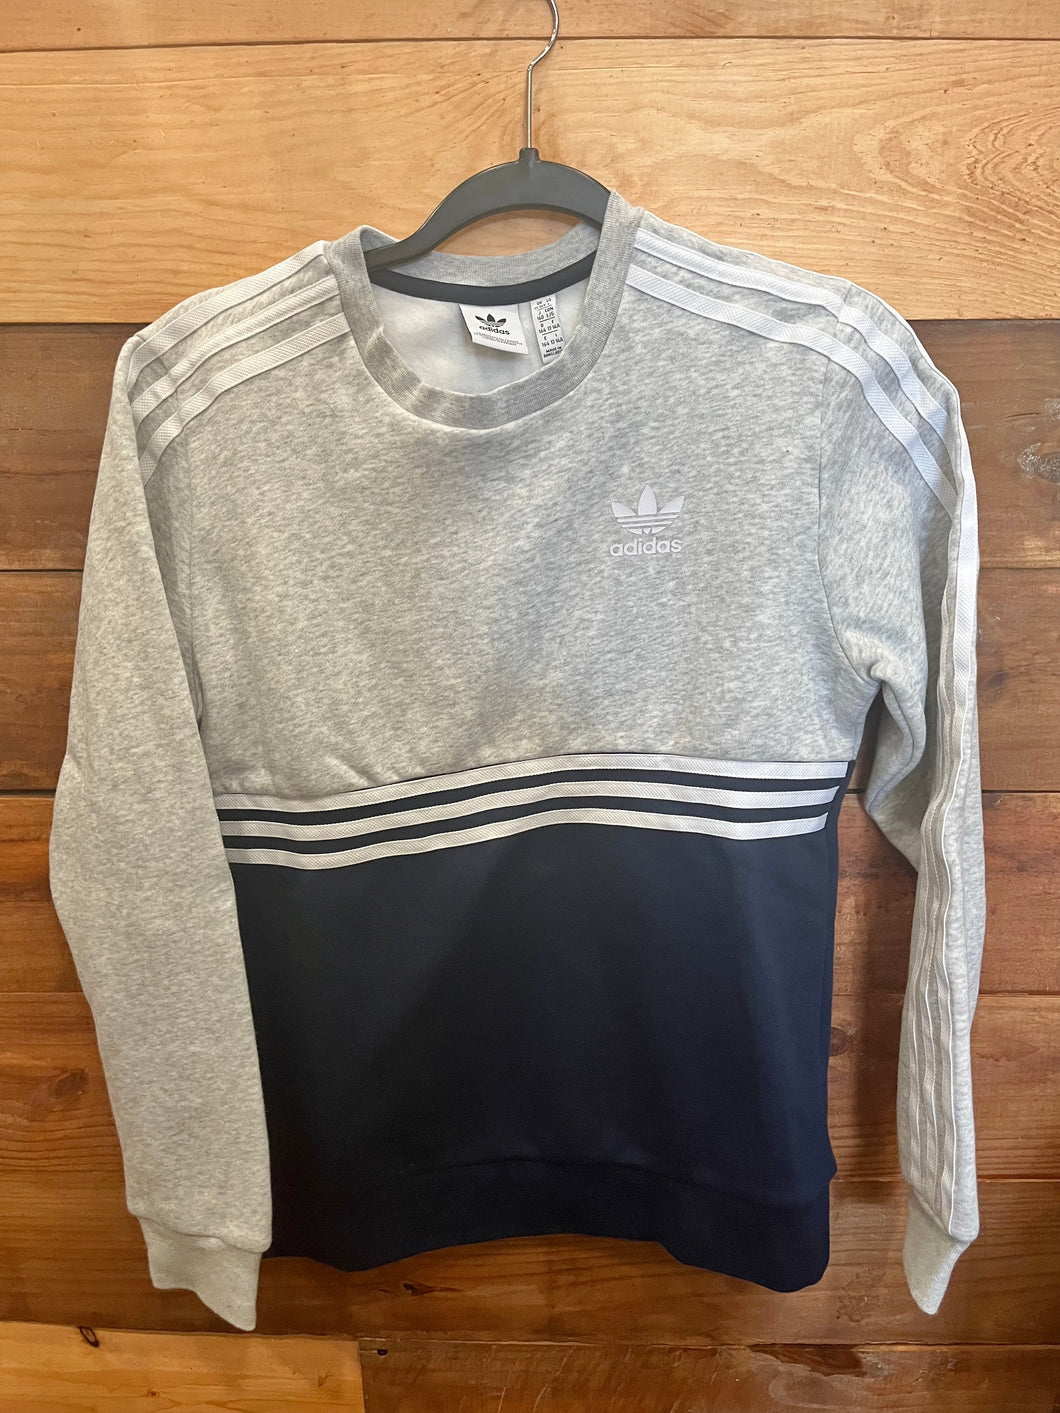 Adidas Gray Sweater Size 13-14Y